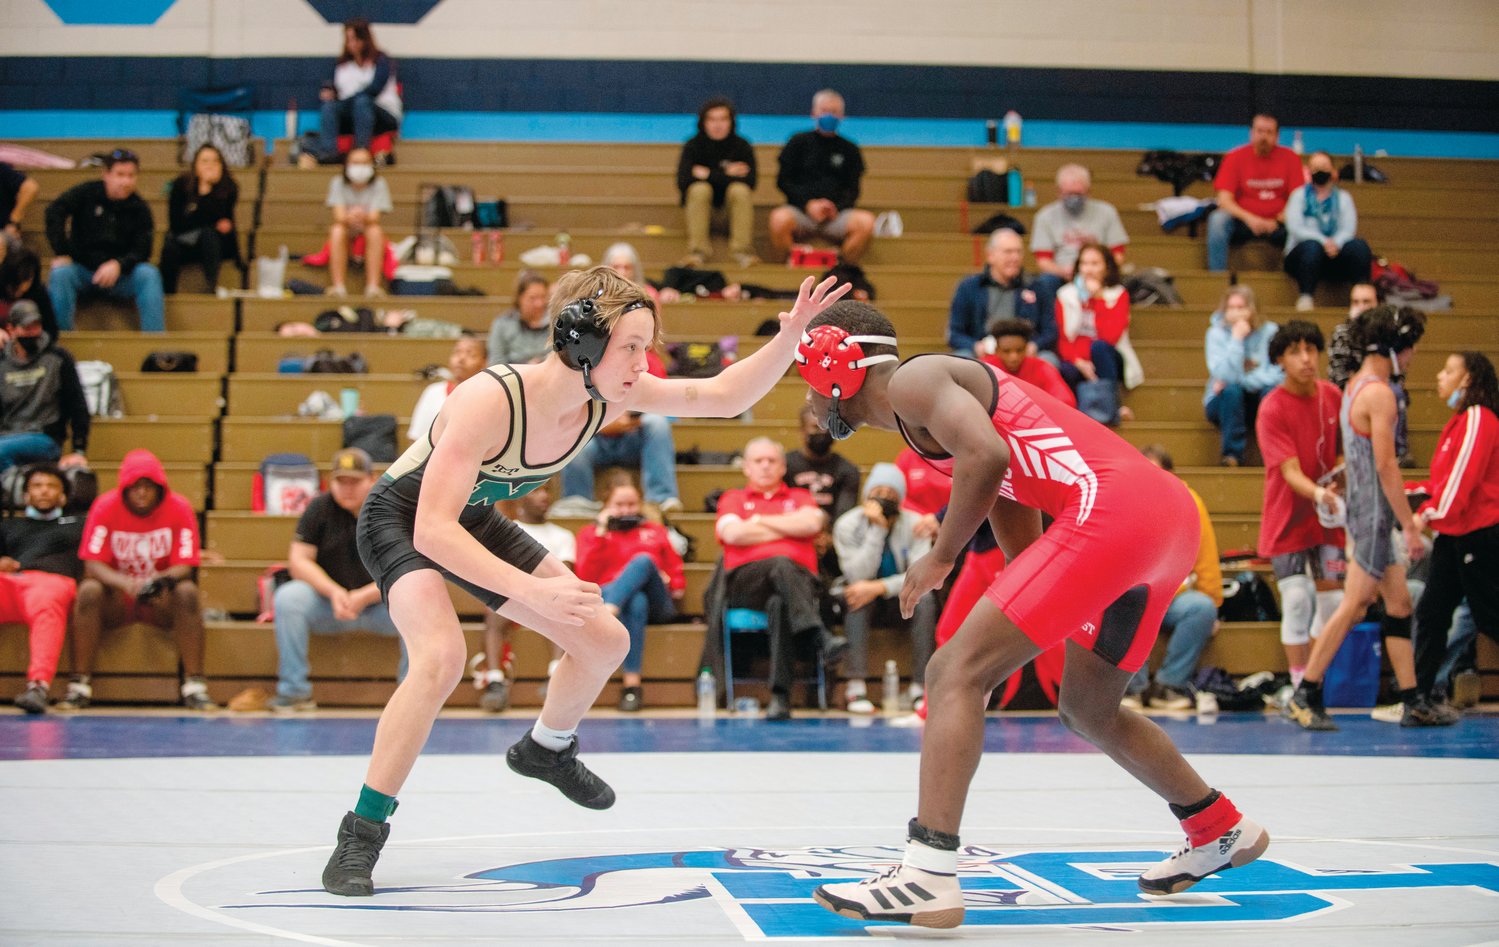 Northwood 120-pounder Coltrane Northington (left) sizes up his opponent, Seventy-First High School's Ramir Hall, during a match in the NCHSAA 3A Mideast Wrestling Regionals last Saturday at Union Pines High School.